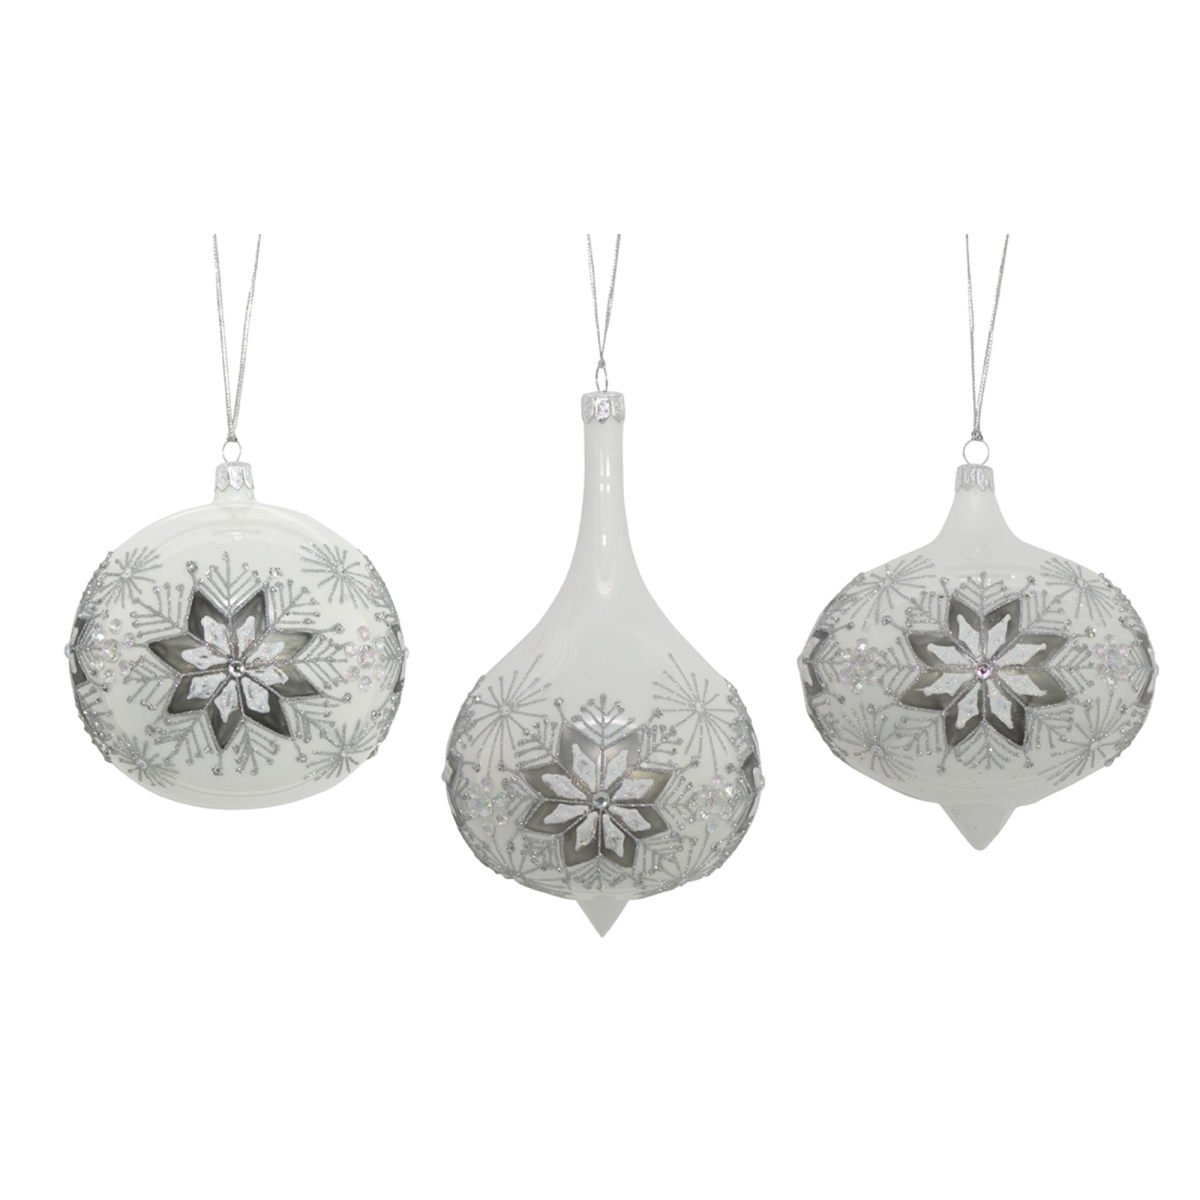 73679ds 7 X 5.5 X 7.5 In. Glass Ornament, White & Silver - Set Of 3